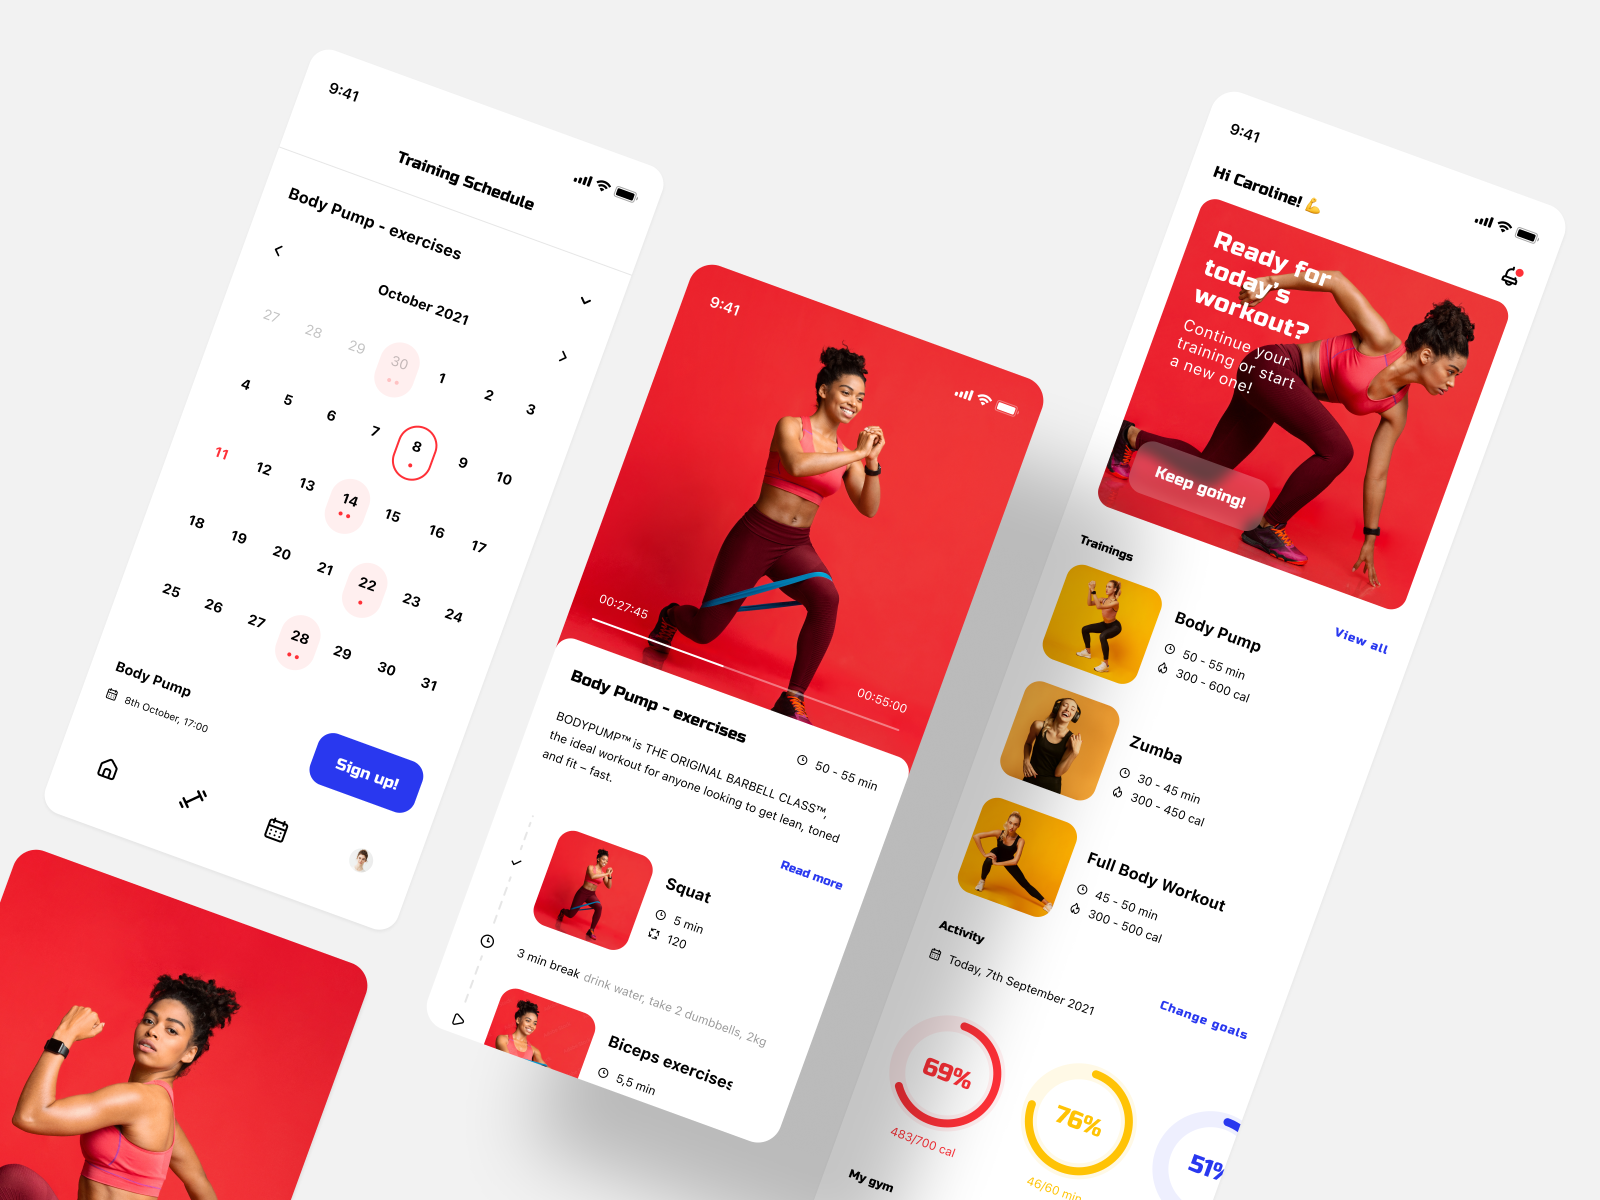 A fitness studio app becomes a valuable tool for customer retention, loyalty, and overall business growth, positioning your fitness brand at the forefront of the industry. 